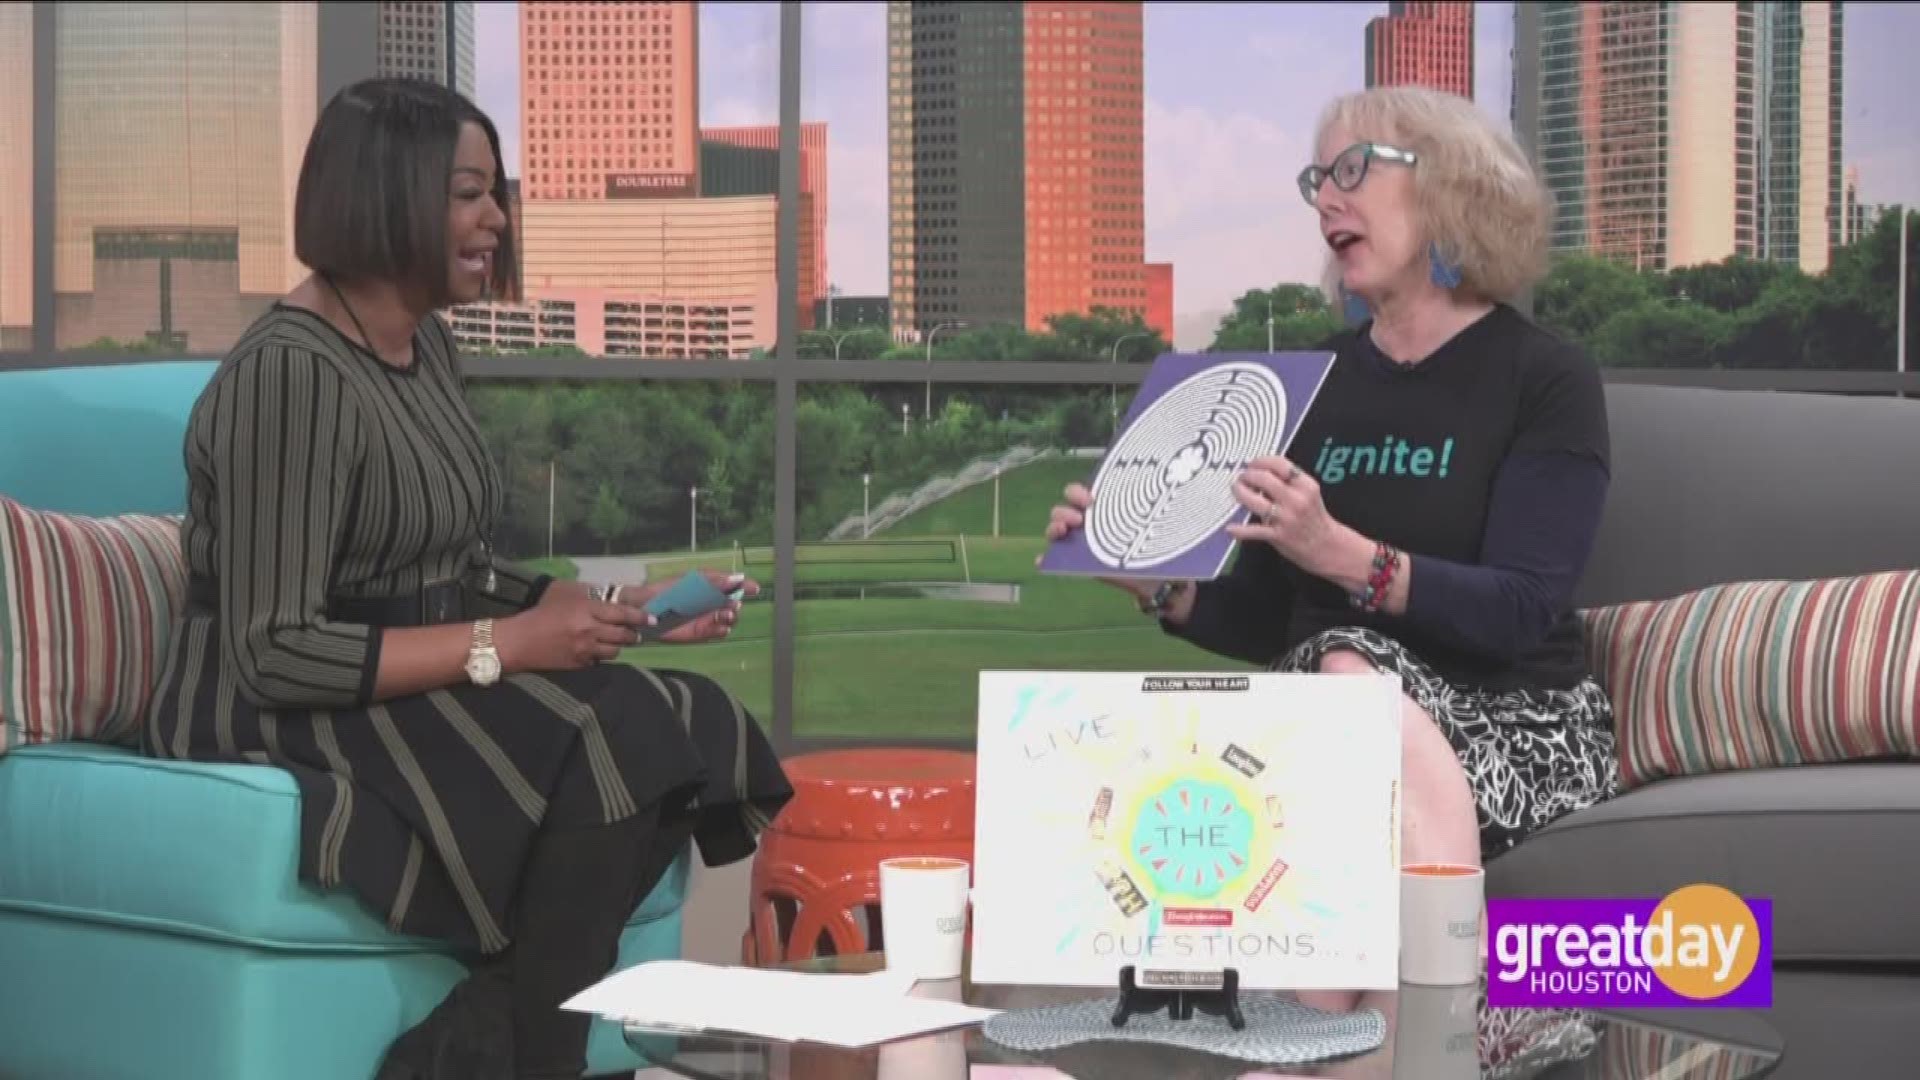 Sarah Gish with Gish Creative stopped by Great Day Houston with ways to ignite your life in 2020.